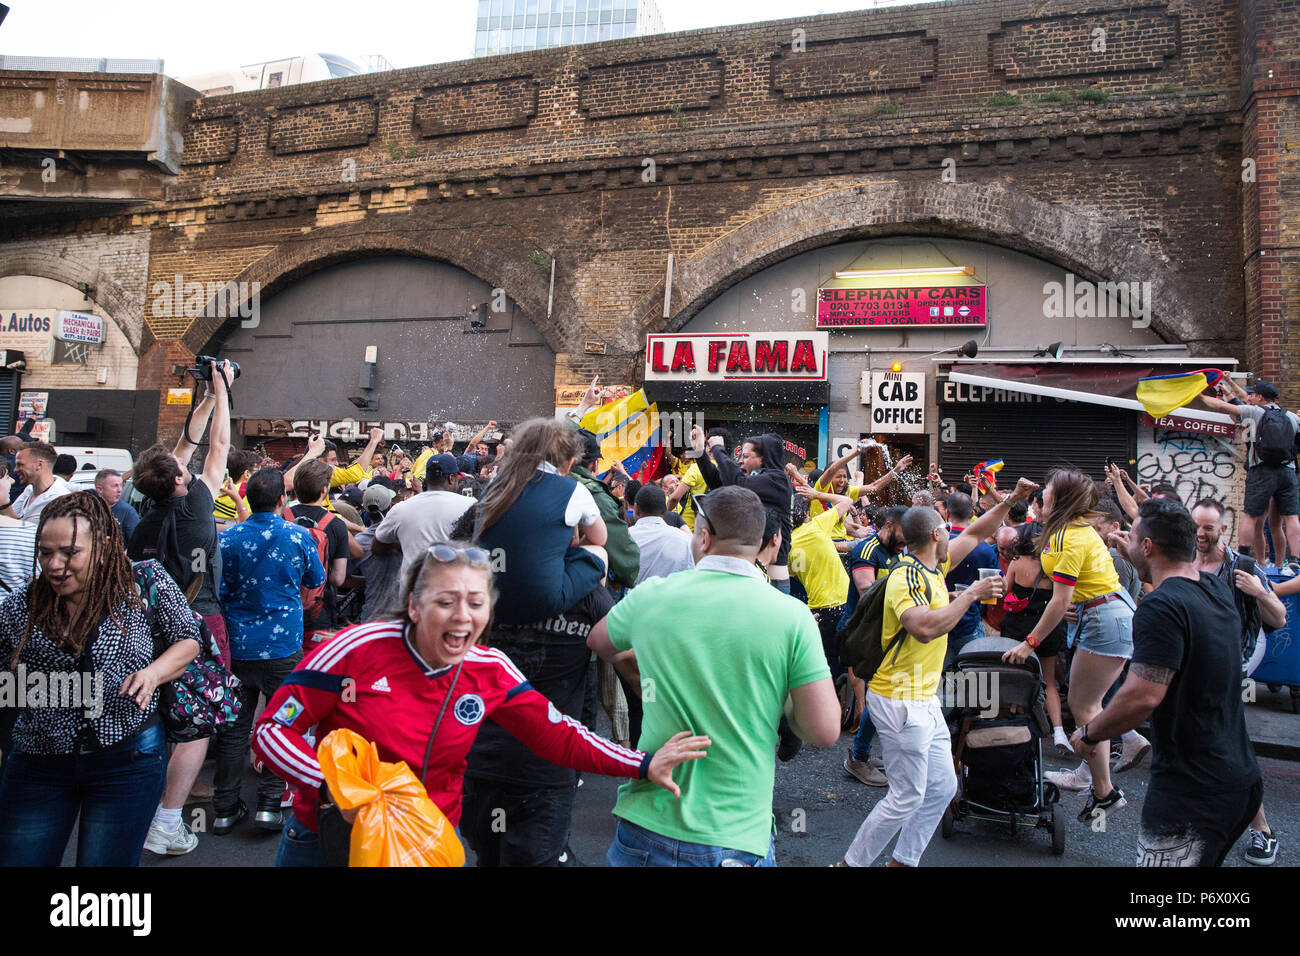 London, UK. 3rd July, 2018. Members of London's Colombian community celebrate the Colombian national football team's equalising goal against England in injury time at the end of normal time in the FIFA 2018 World Cup Last 16 match in the street outside a Colombian bar in Elephant and Castle. England eventually won the match on penalties. Credit: Mark Kerrison/Alamy Live News Stock Photo